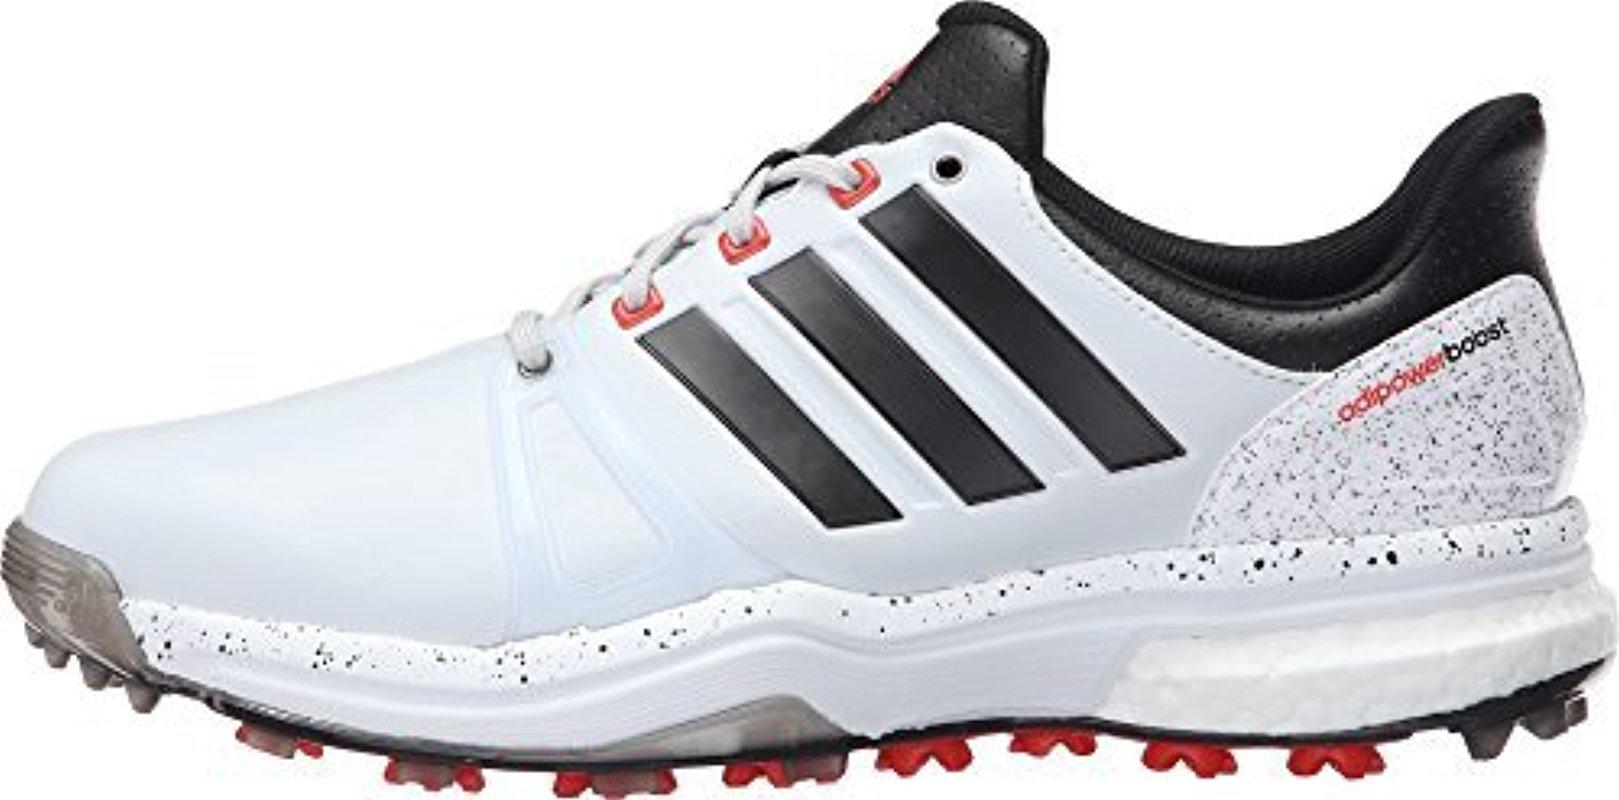 adidas men's adipower boost 2 golf cleated